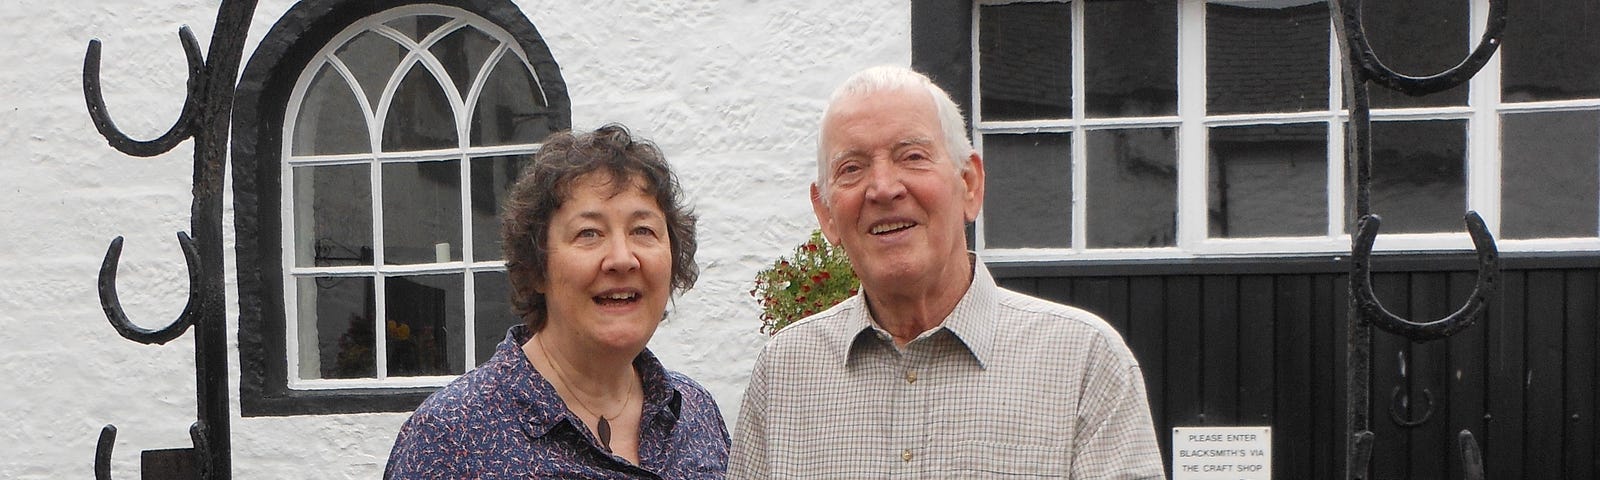 The photo shows Elizabeth Pepper and her late husband Alan standing together in front of a building.